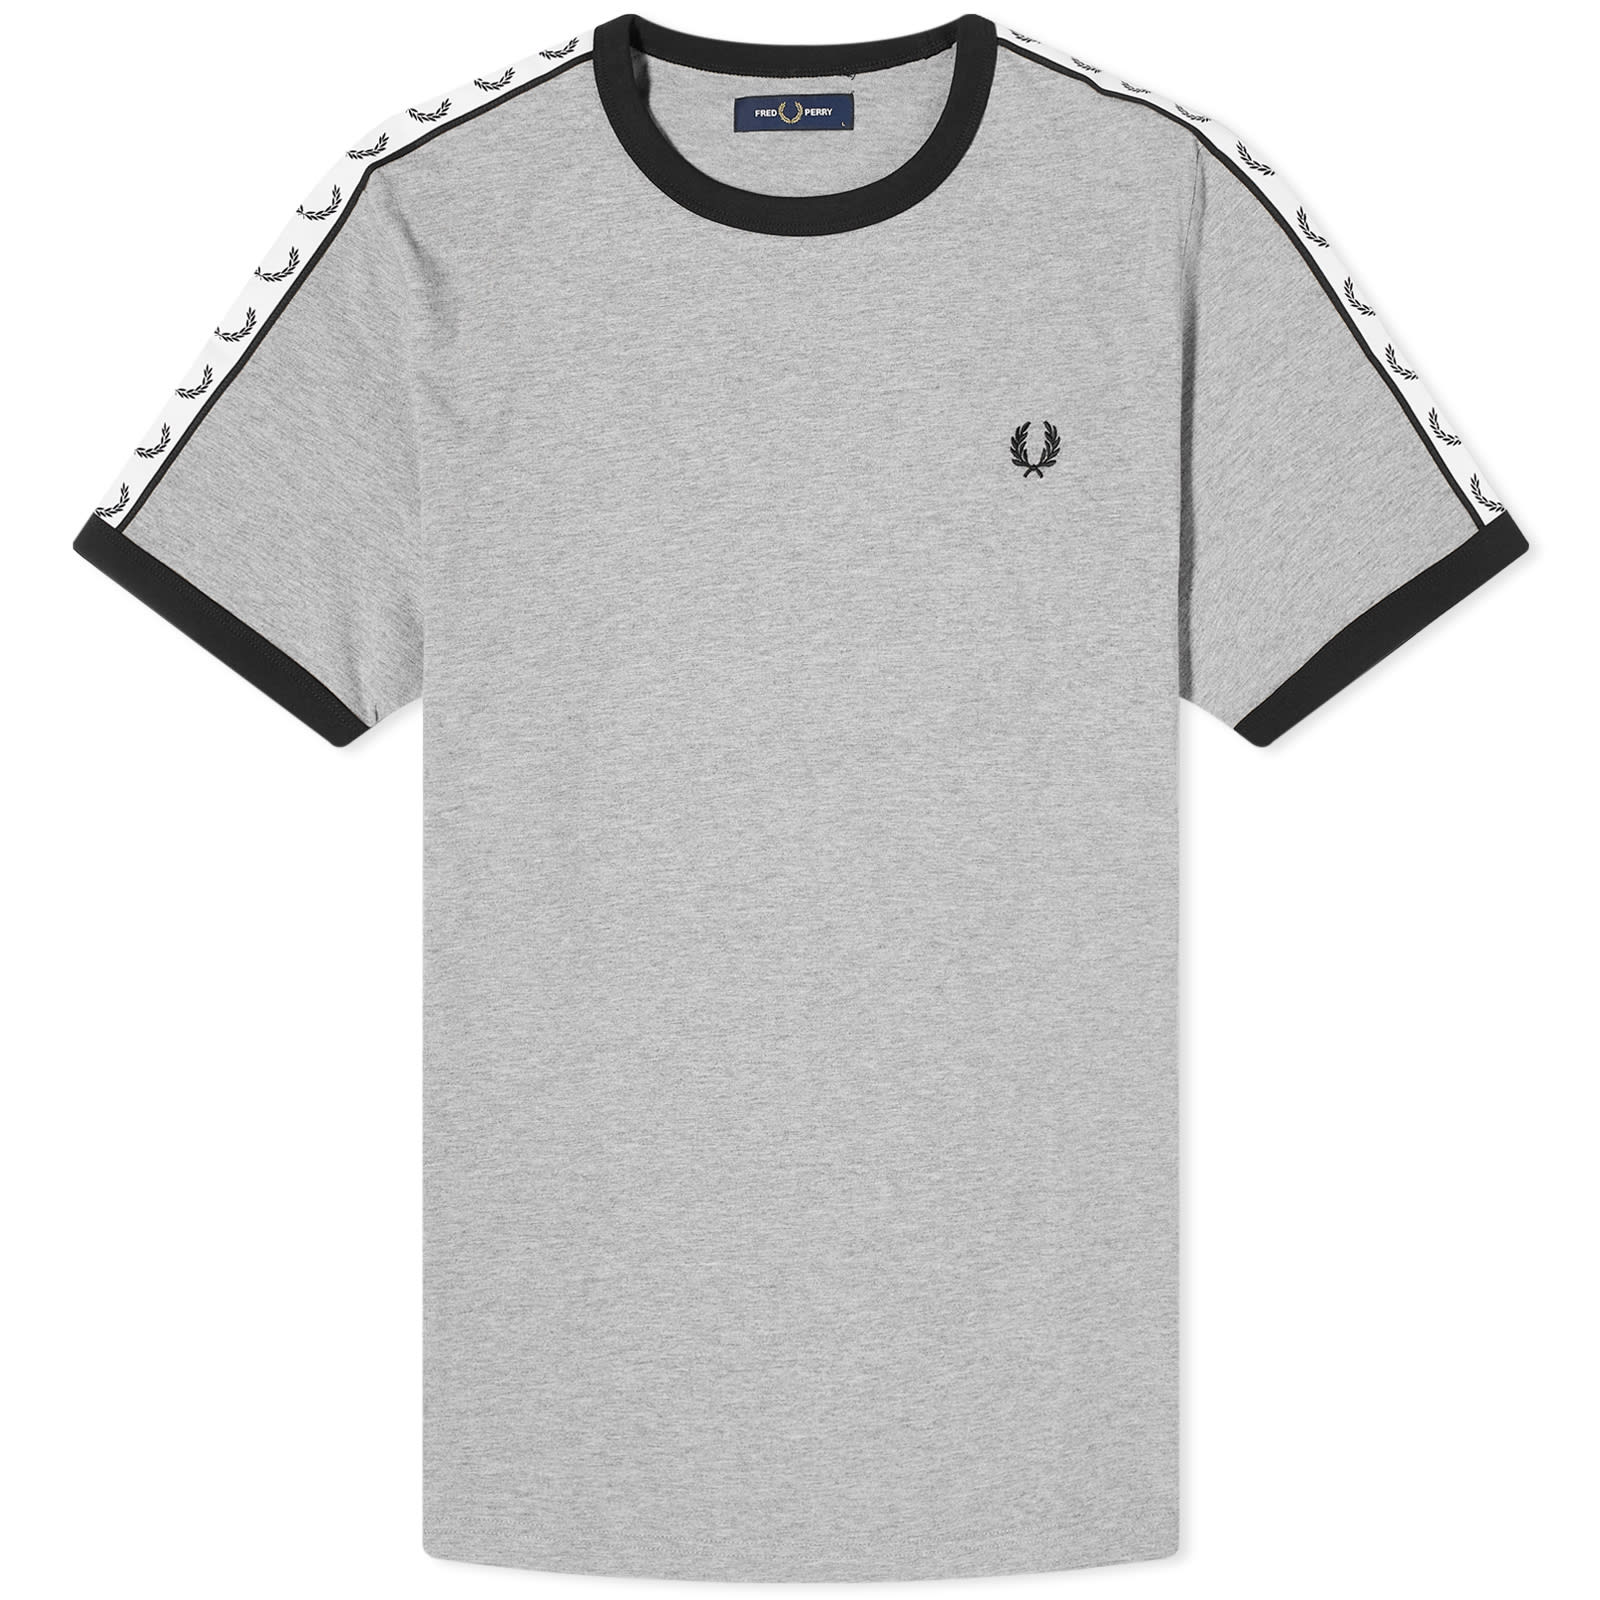 Футболка Fred Perry Taped Ringer, серый футболка fred perry taped ringer tee